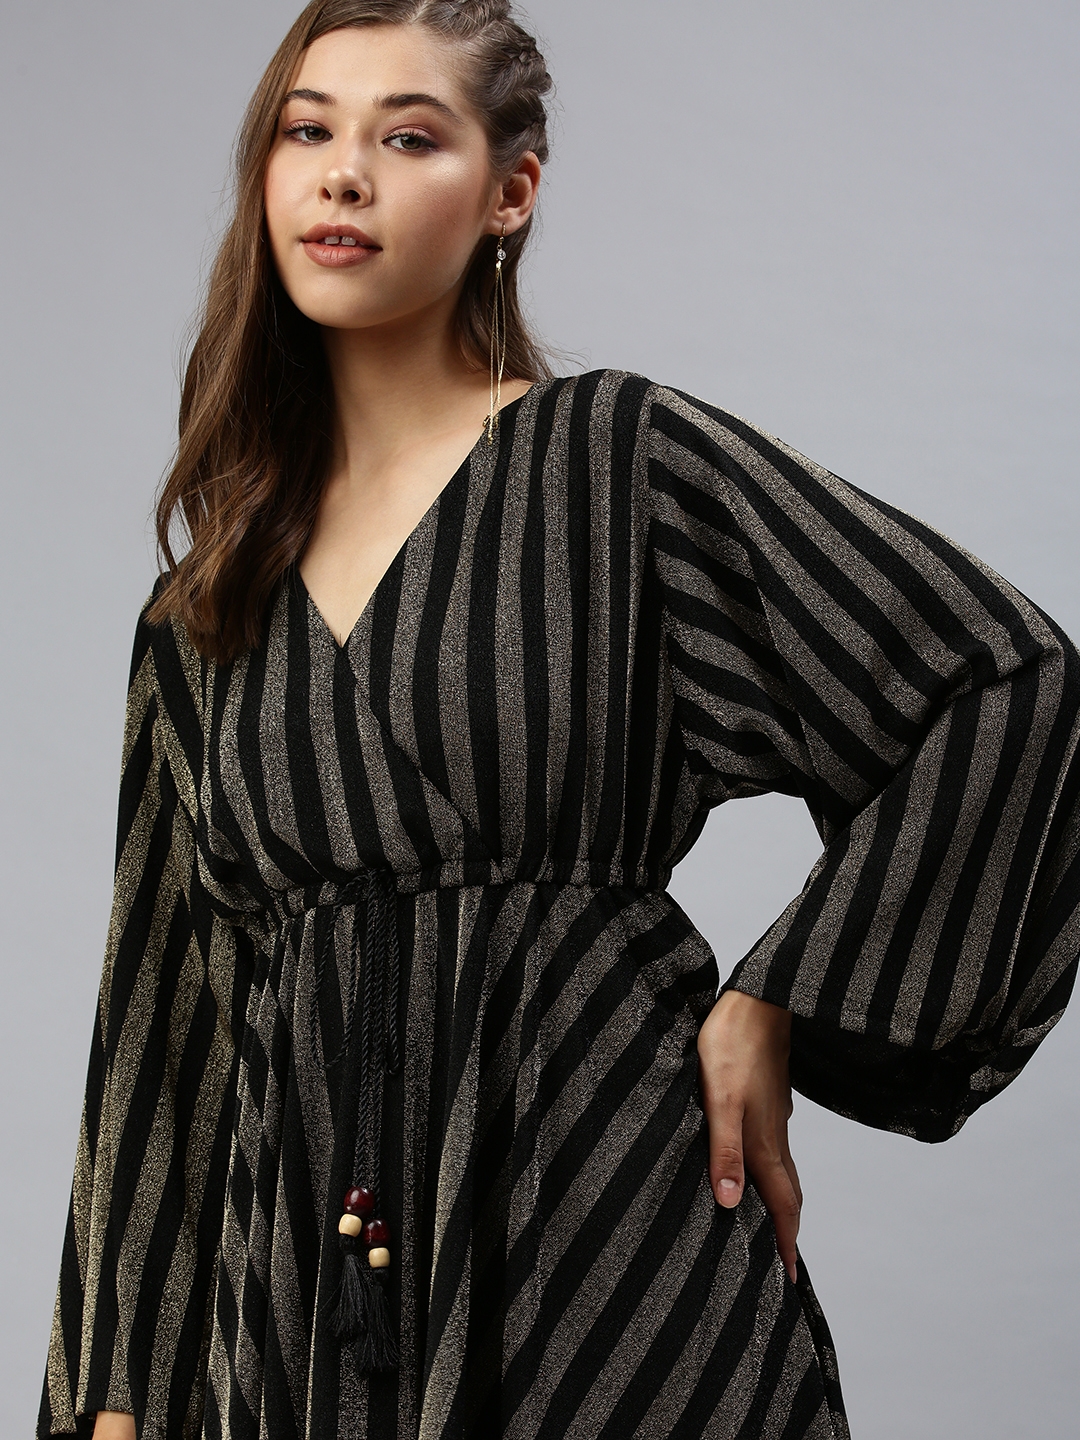 Women's Brown Synthetic Striped Dresses